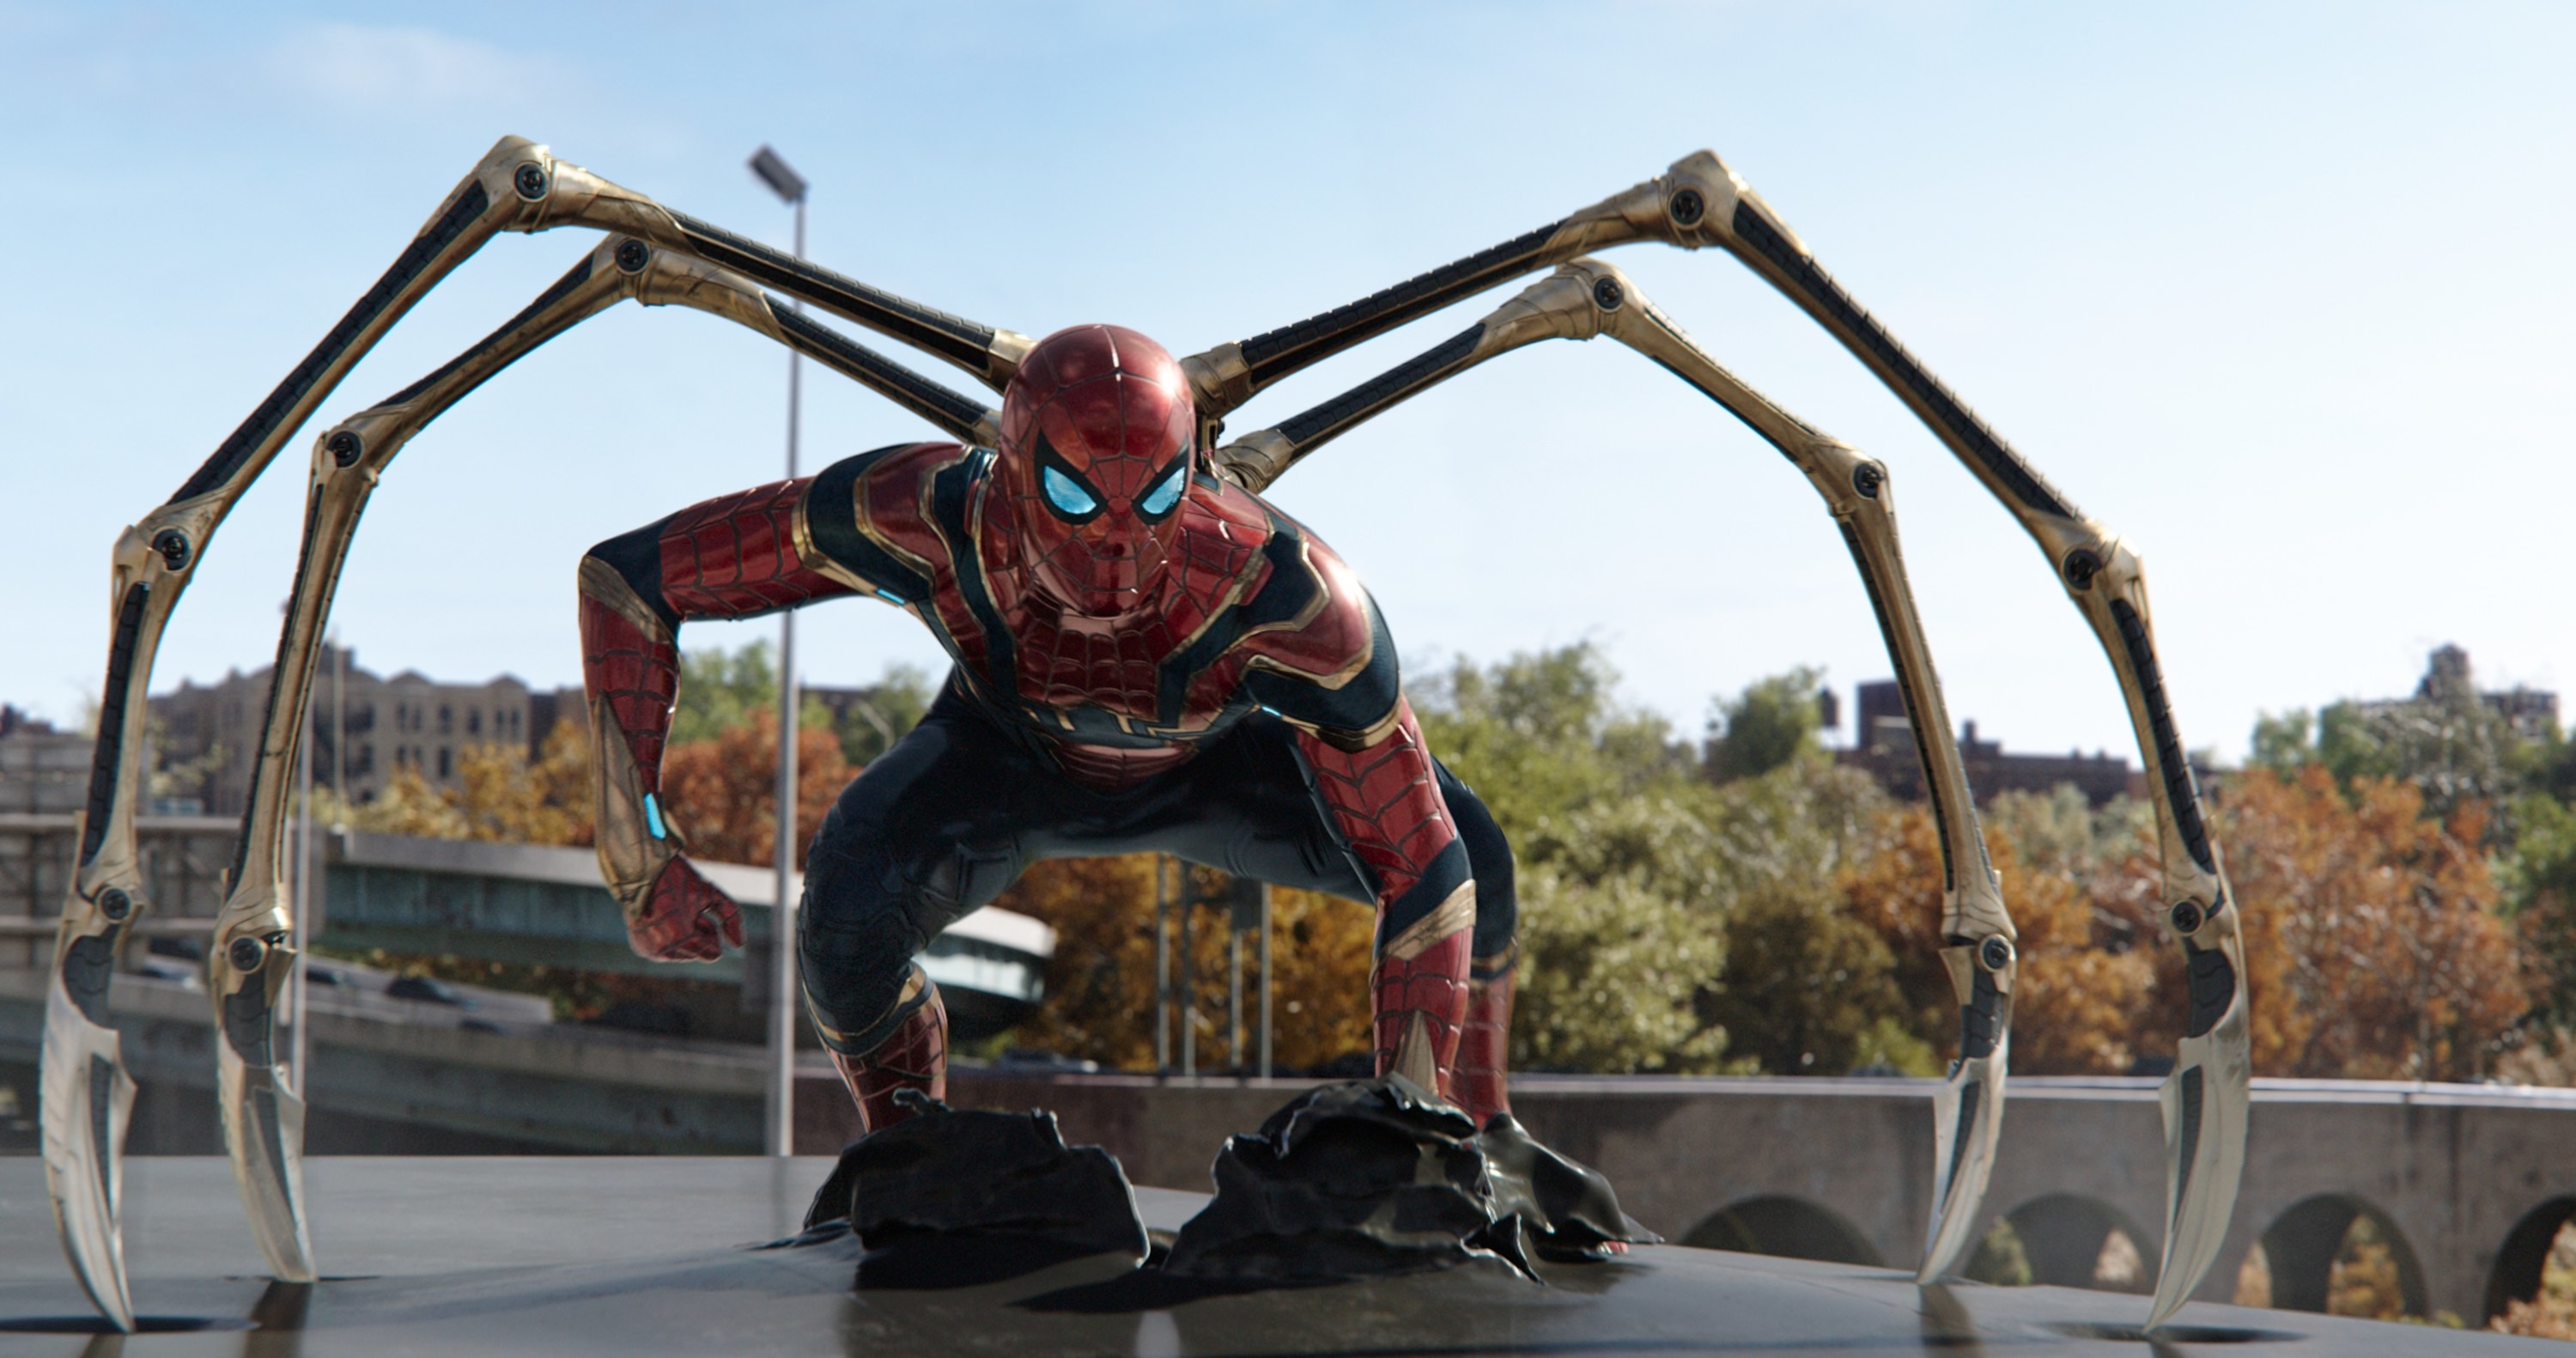 Spider-Man crouching in his Iron Spider suit, with the four metal arms out either side of him